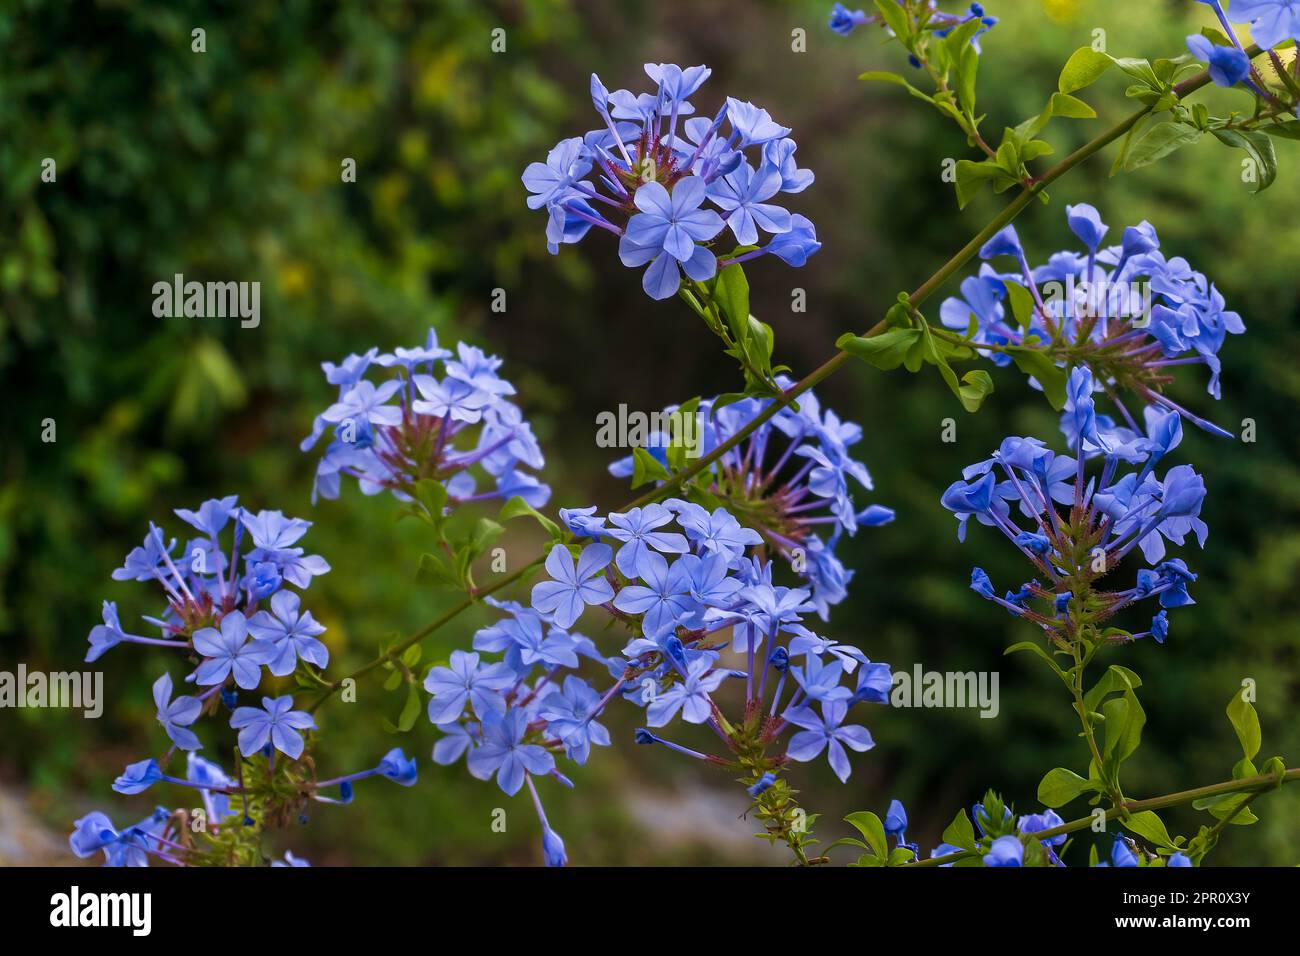 Blooming bush plumbago auriculata with pale blue flowers close up Stock Photo